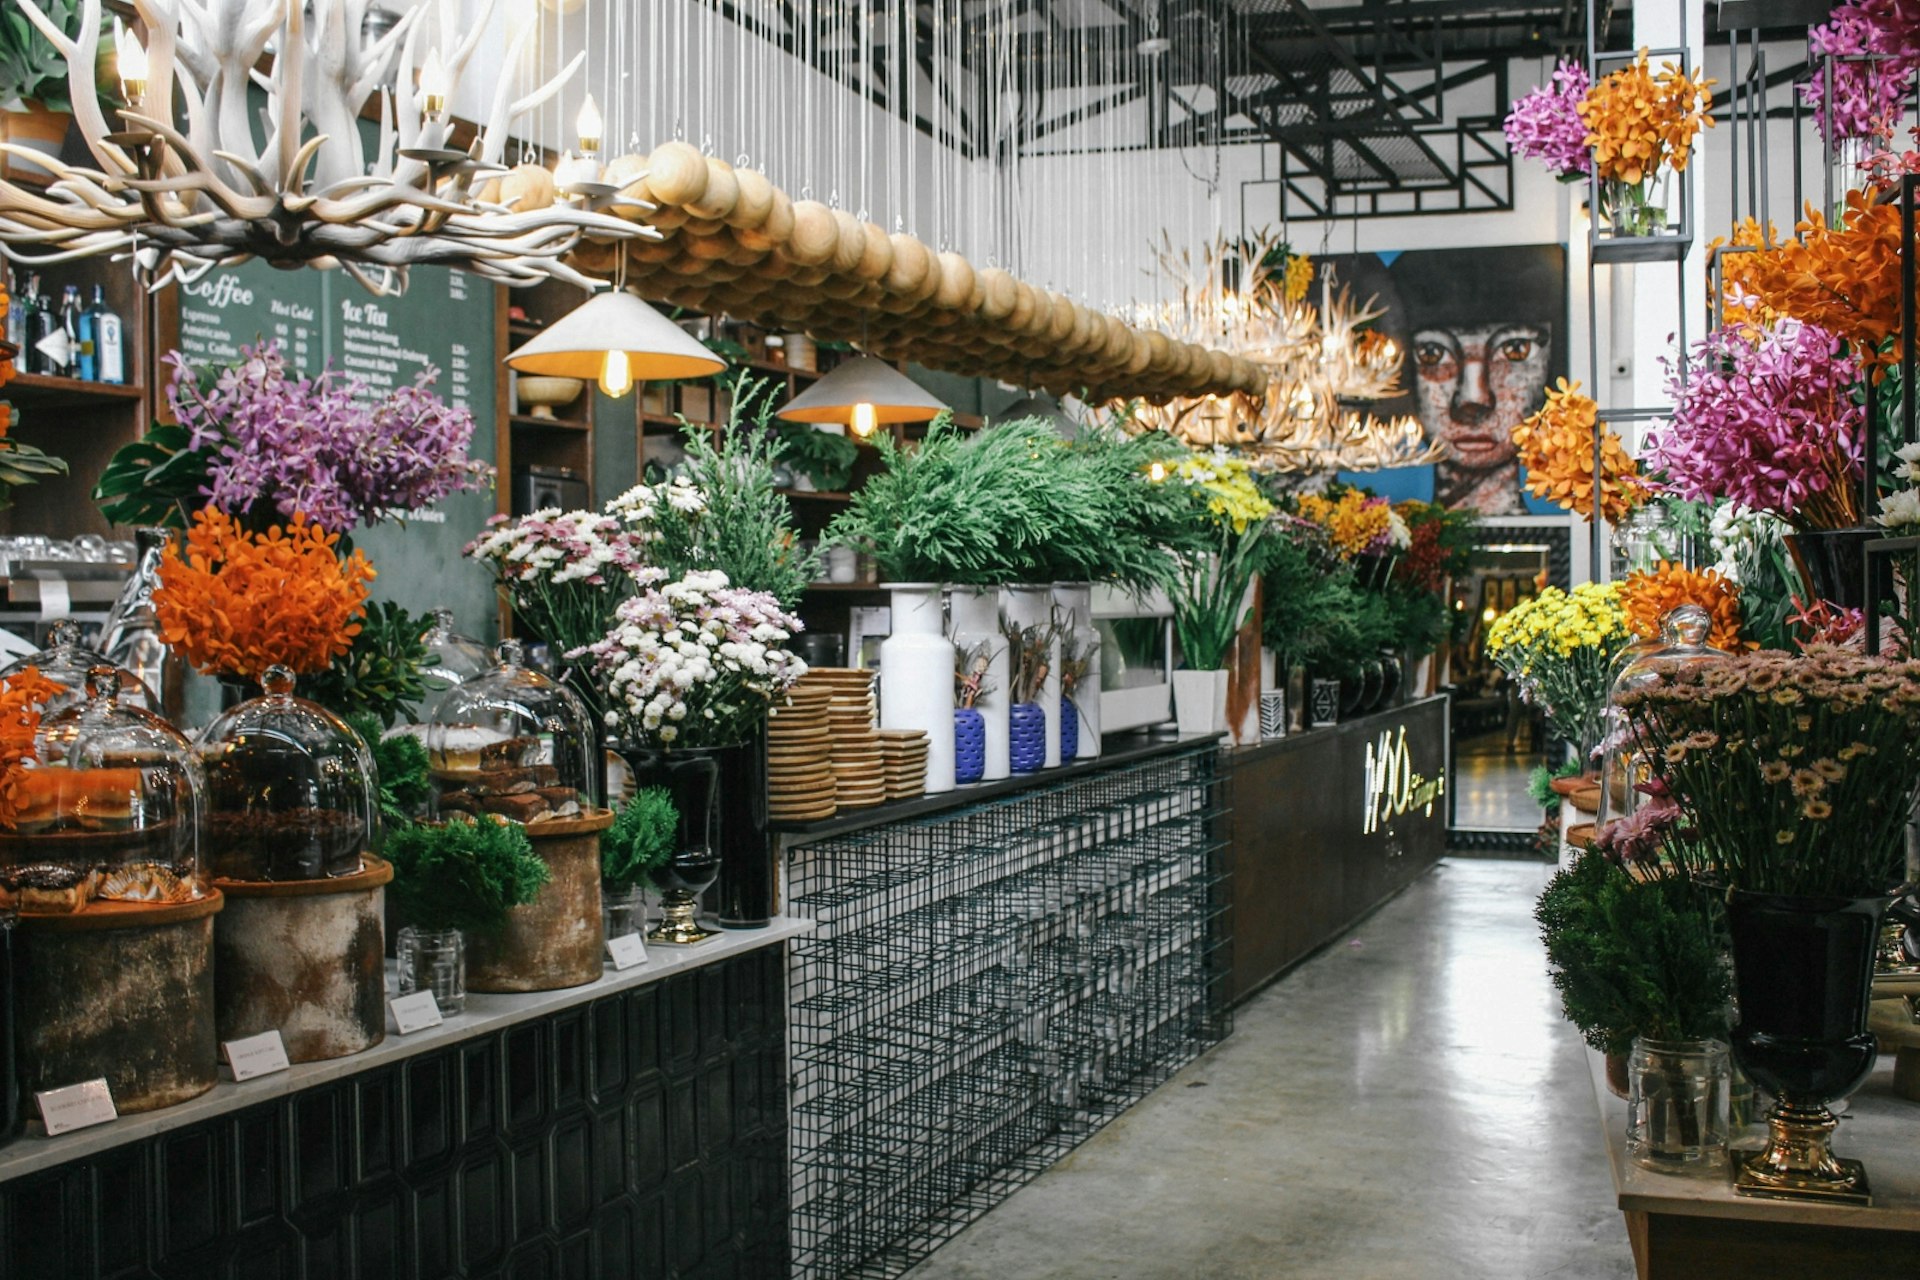 Dine on traditional Thai or Western meals surrounded by foliage at Woo Cafe in Chiang Mai © Alana Morgan / Lonely Planet